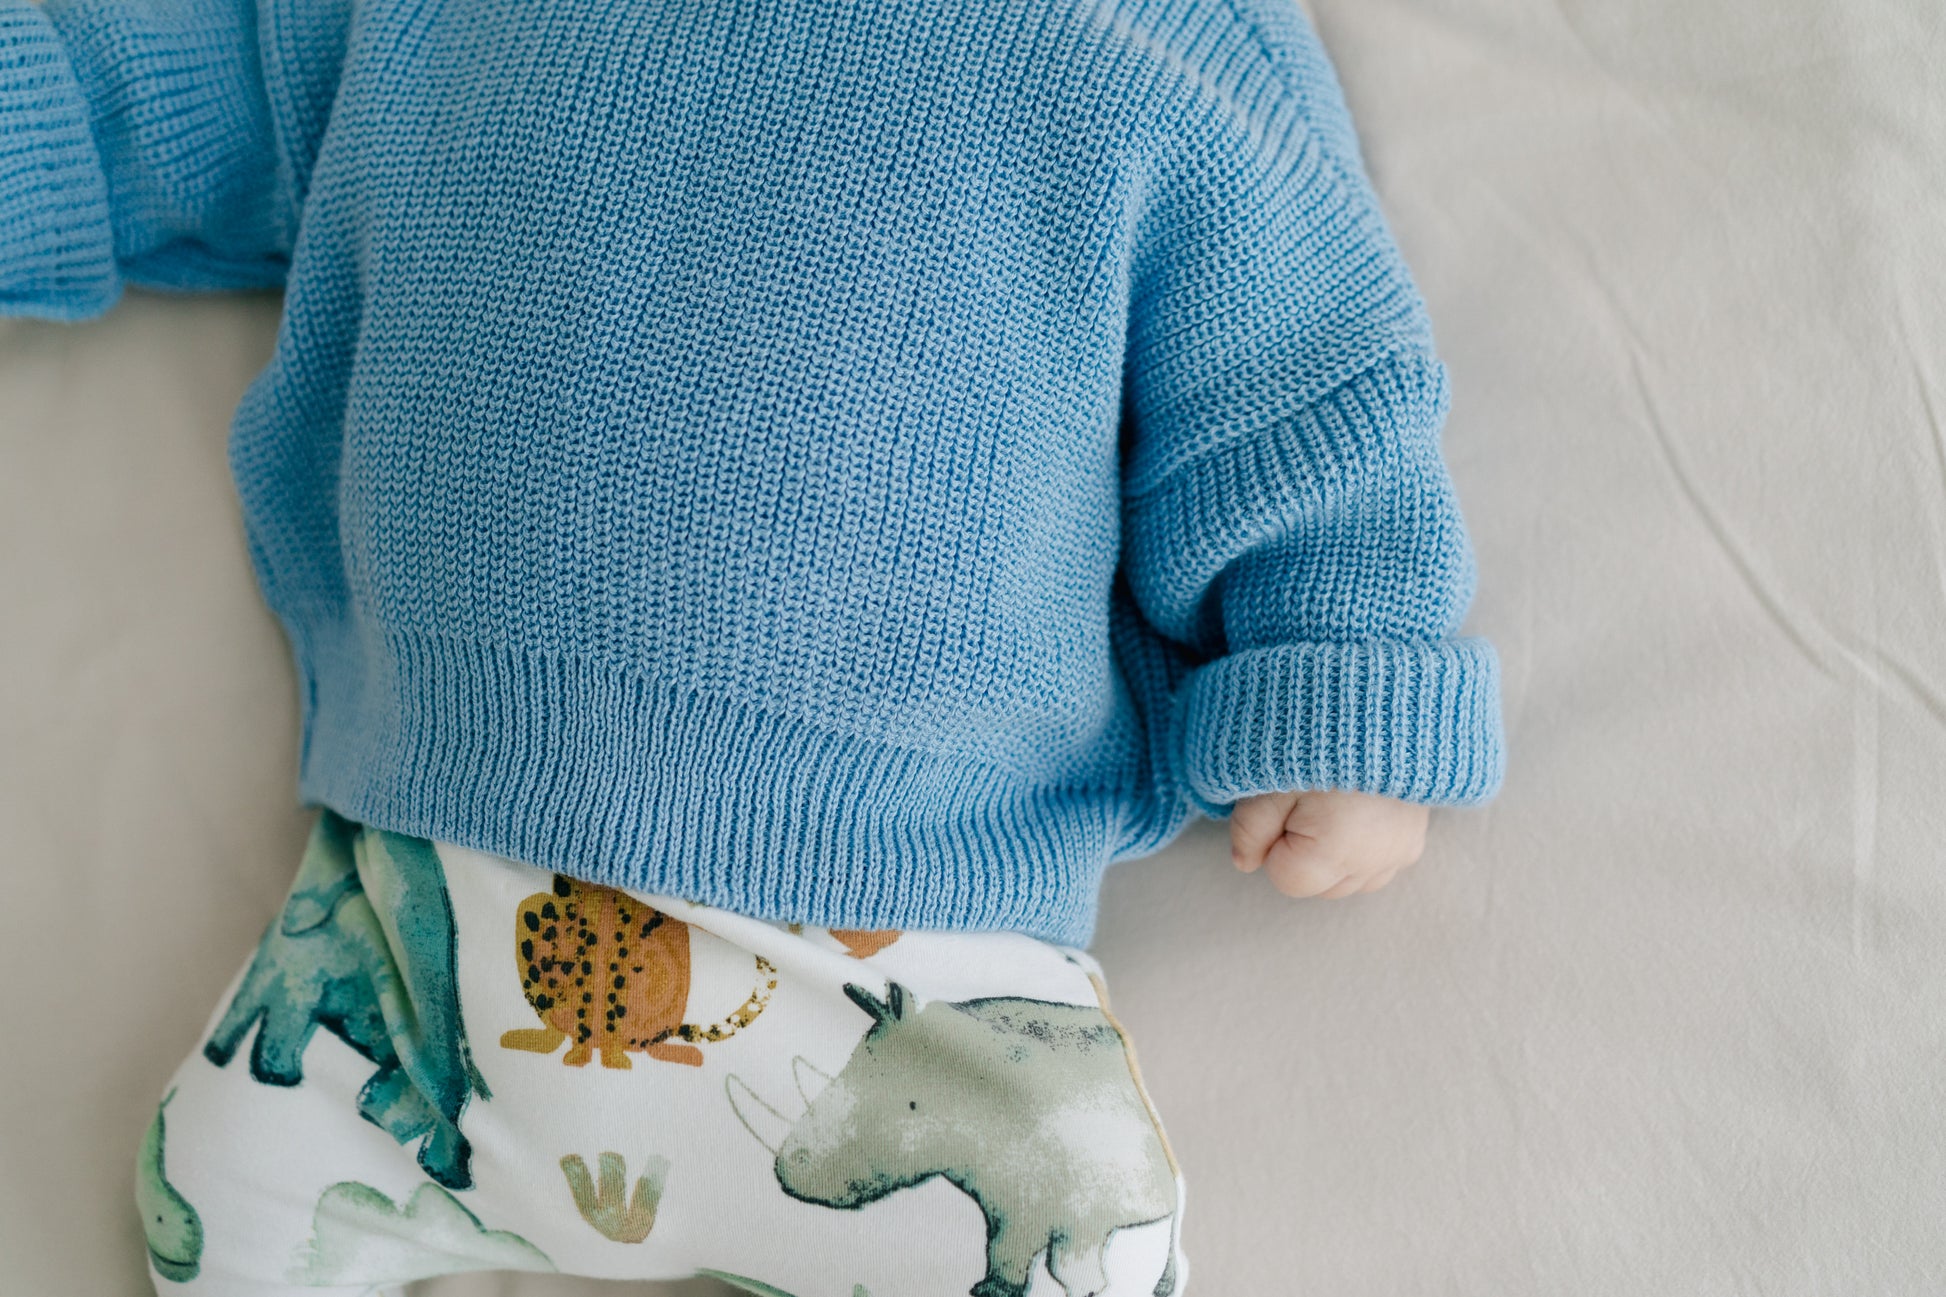 newborn sweater, oversized baby sweater, baby first outfit, baby coming home outfit